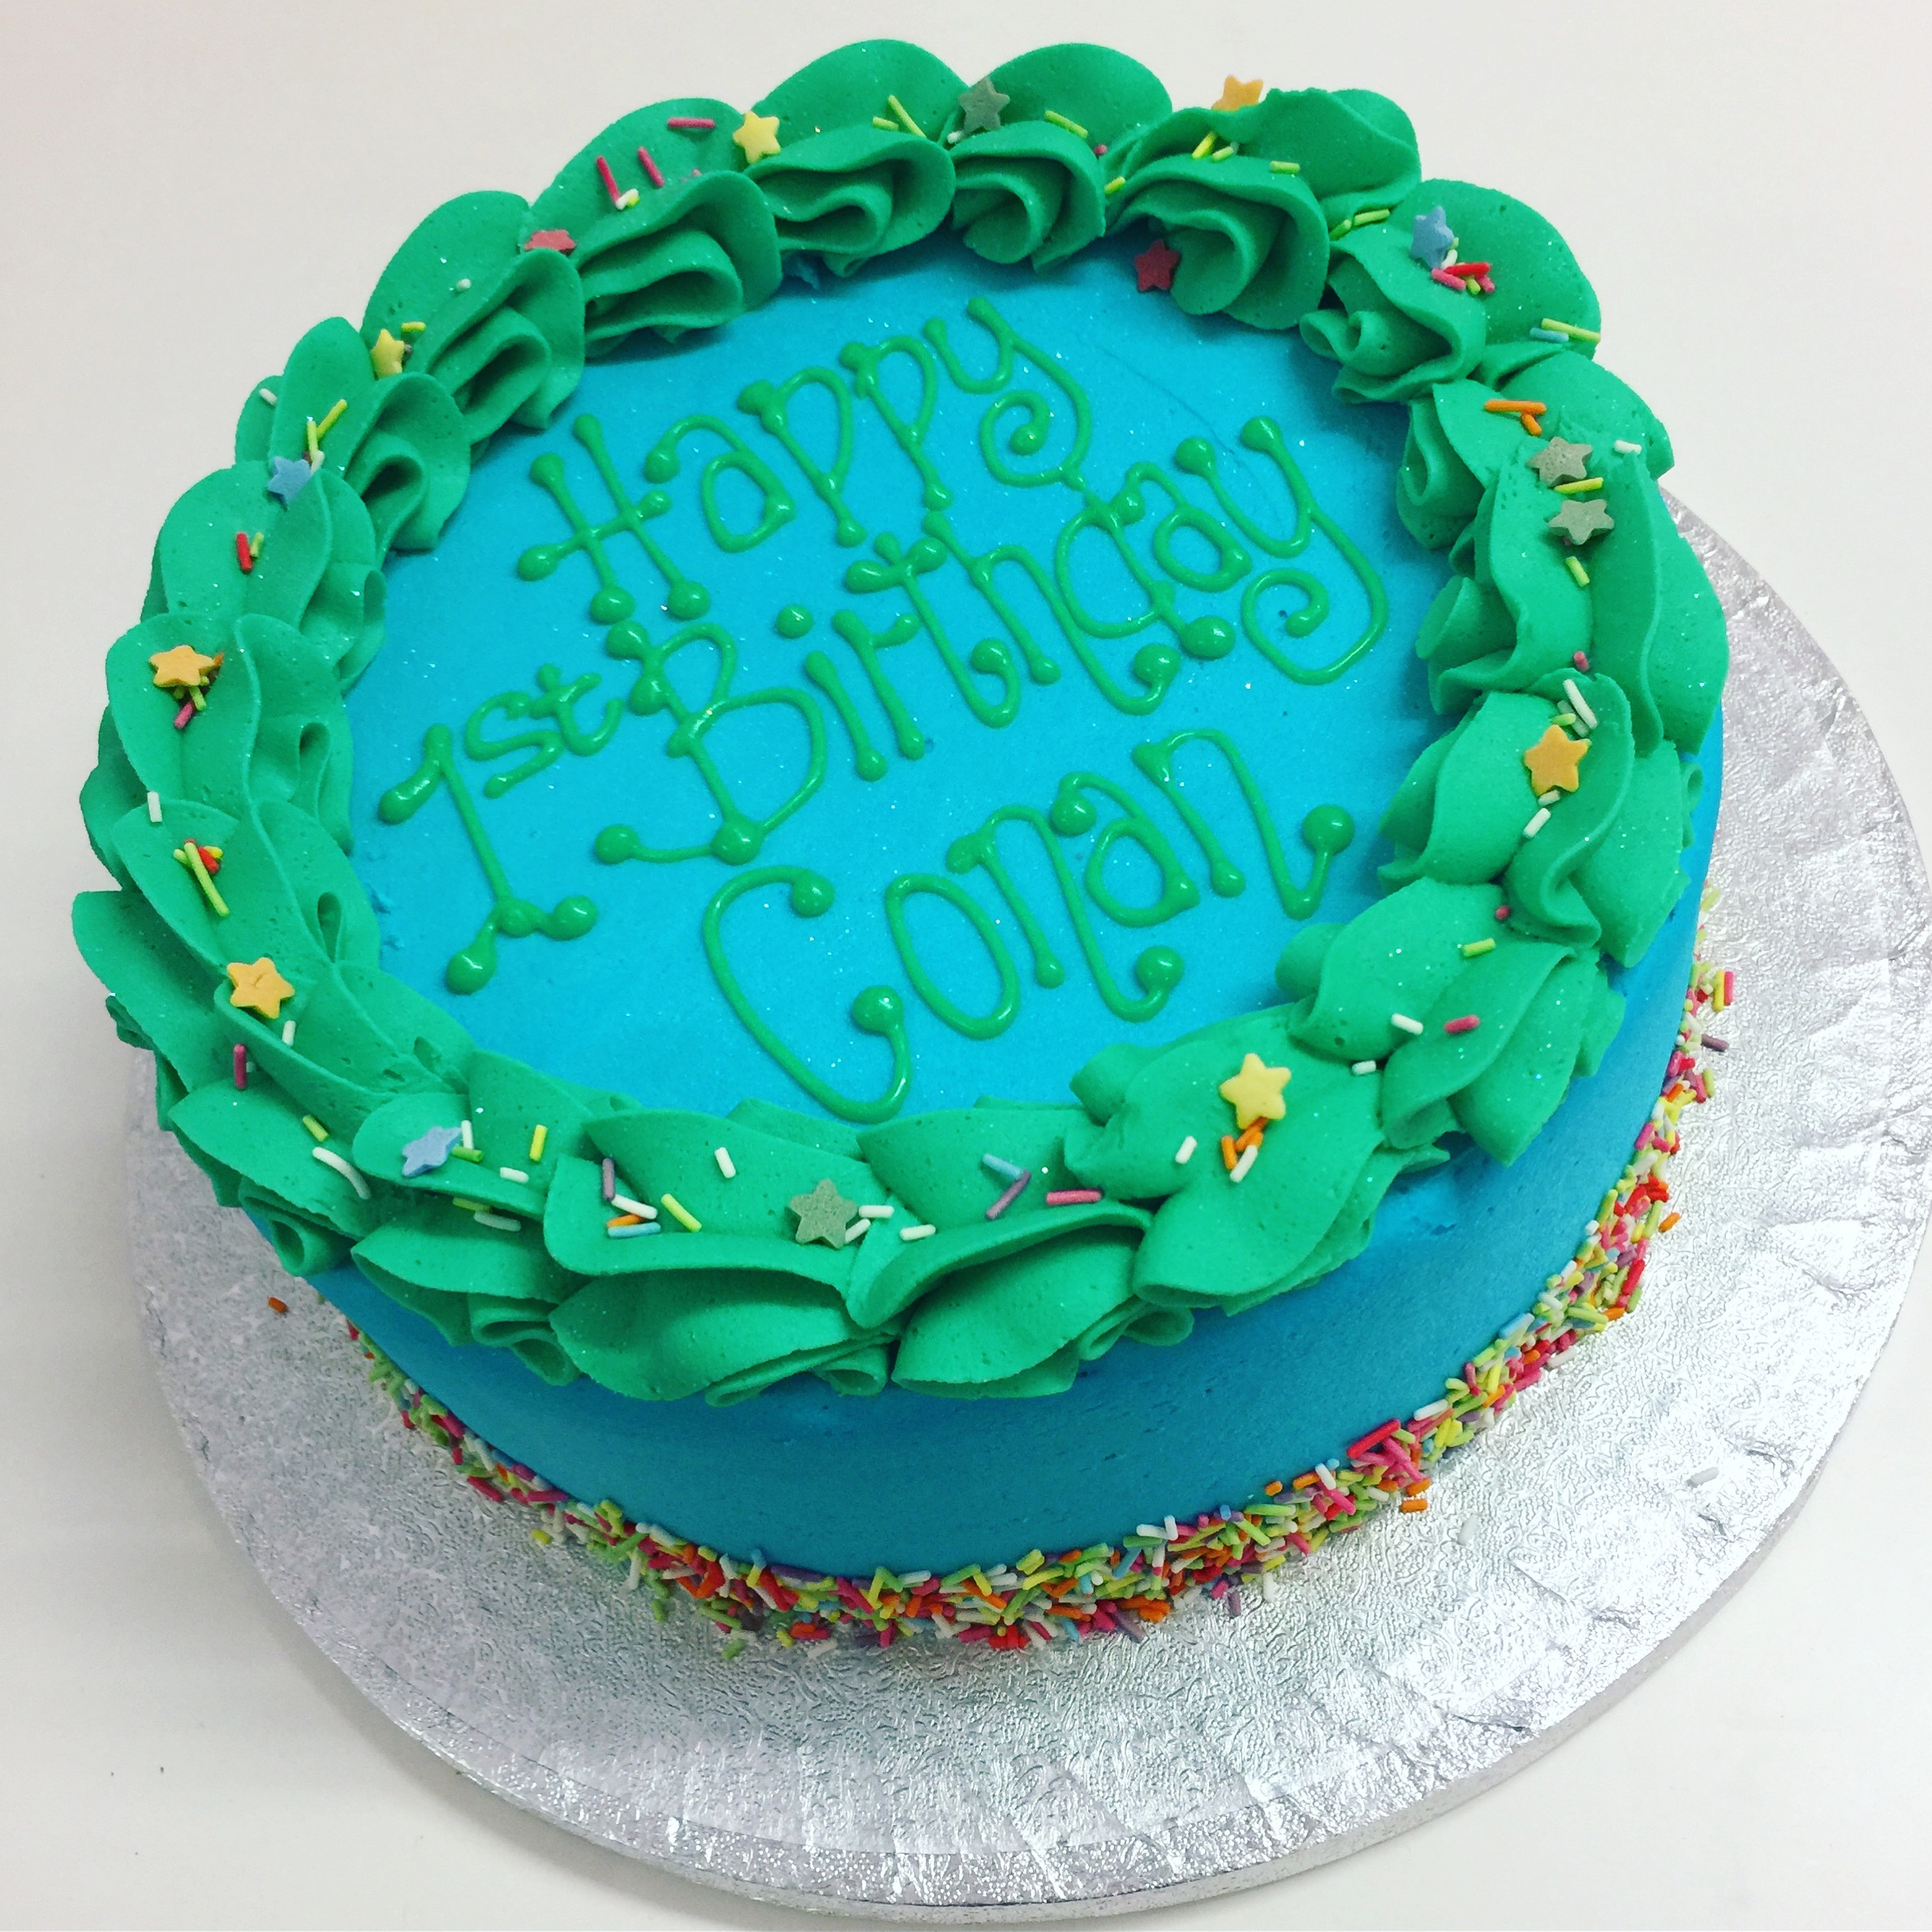 Blue & Green with Sprinkle Bottom